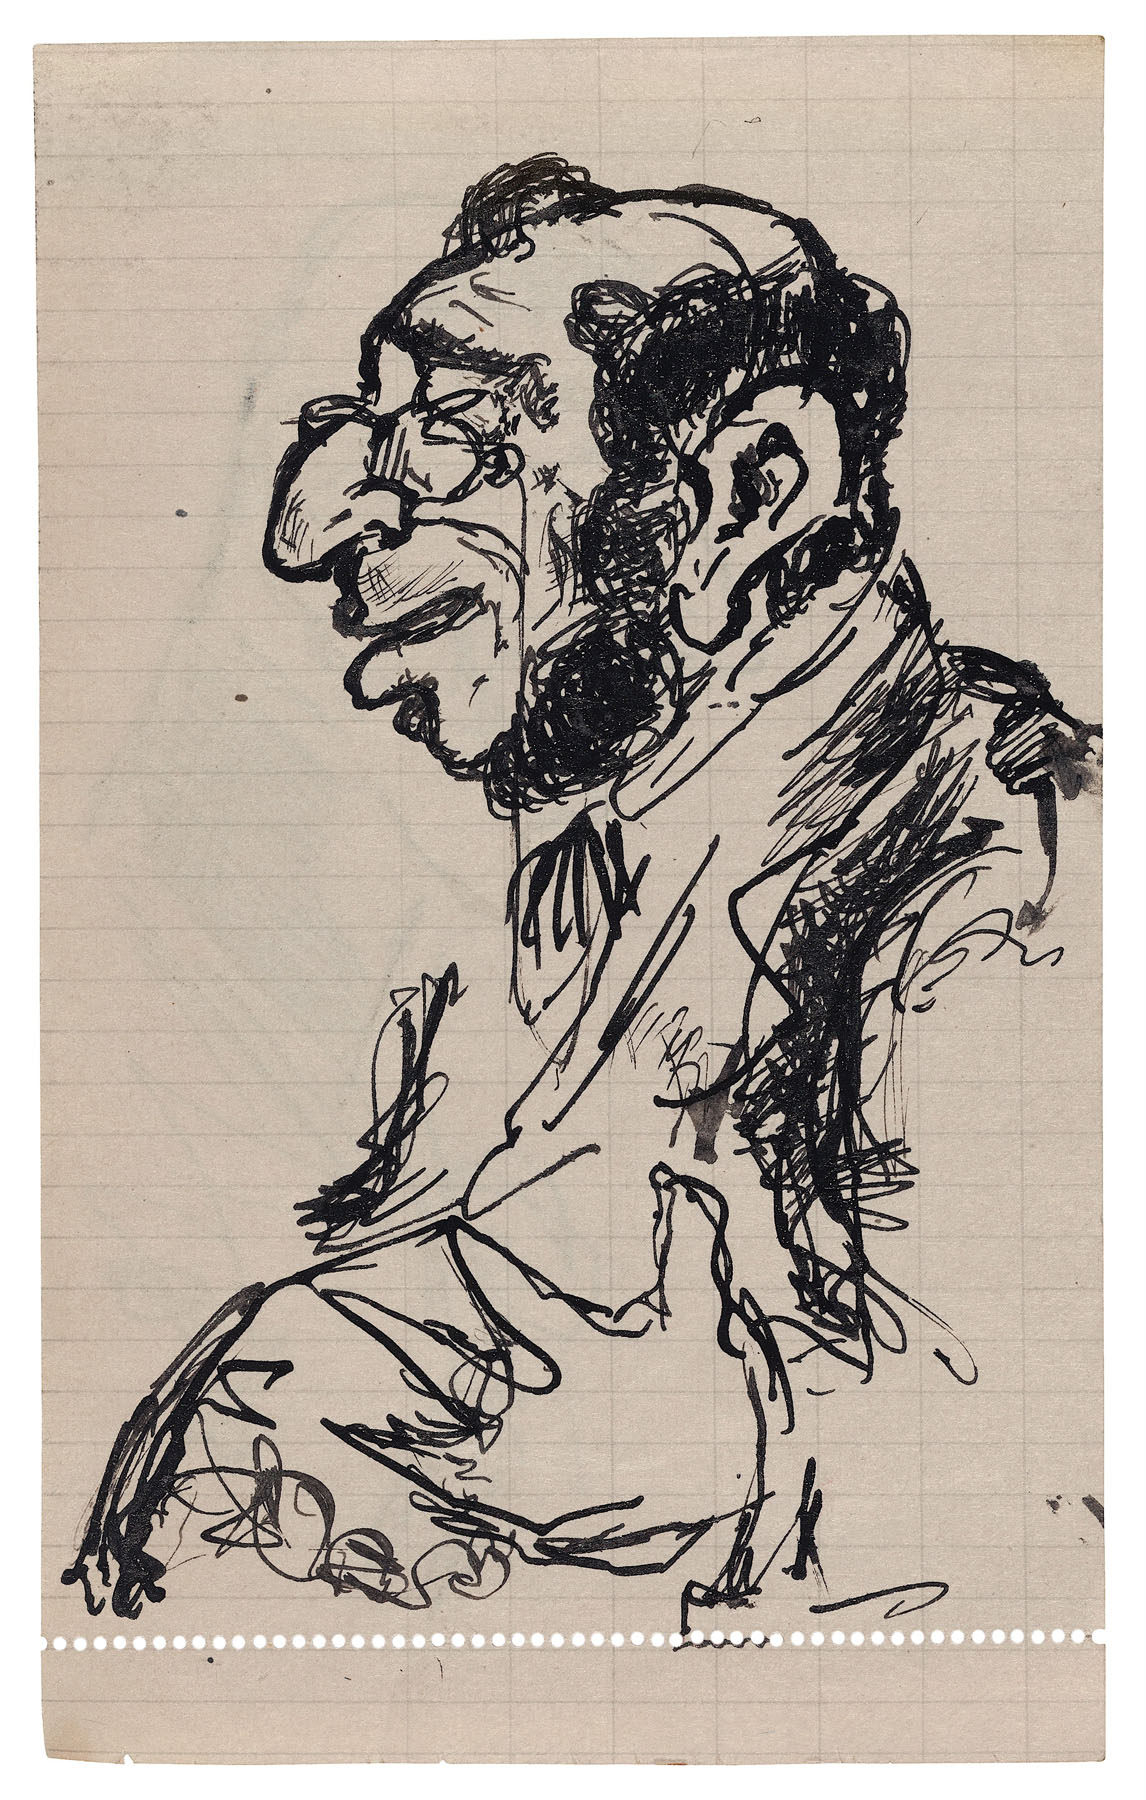 Fritz Ascher, Male Portrait in Profile, c. 1913. Black ink on graph paper, 6 x 3.7 in., 15 x 9.3 cm. Private collection. Photo Malcolm Varon ©Bianca Stock